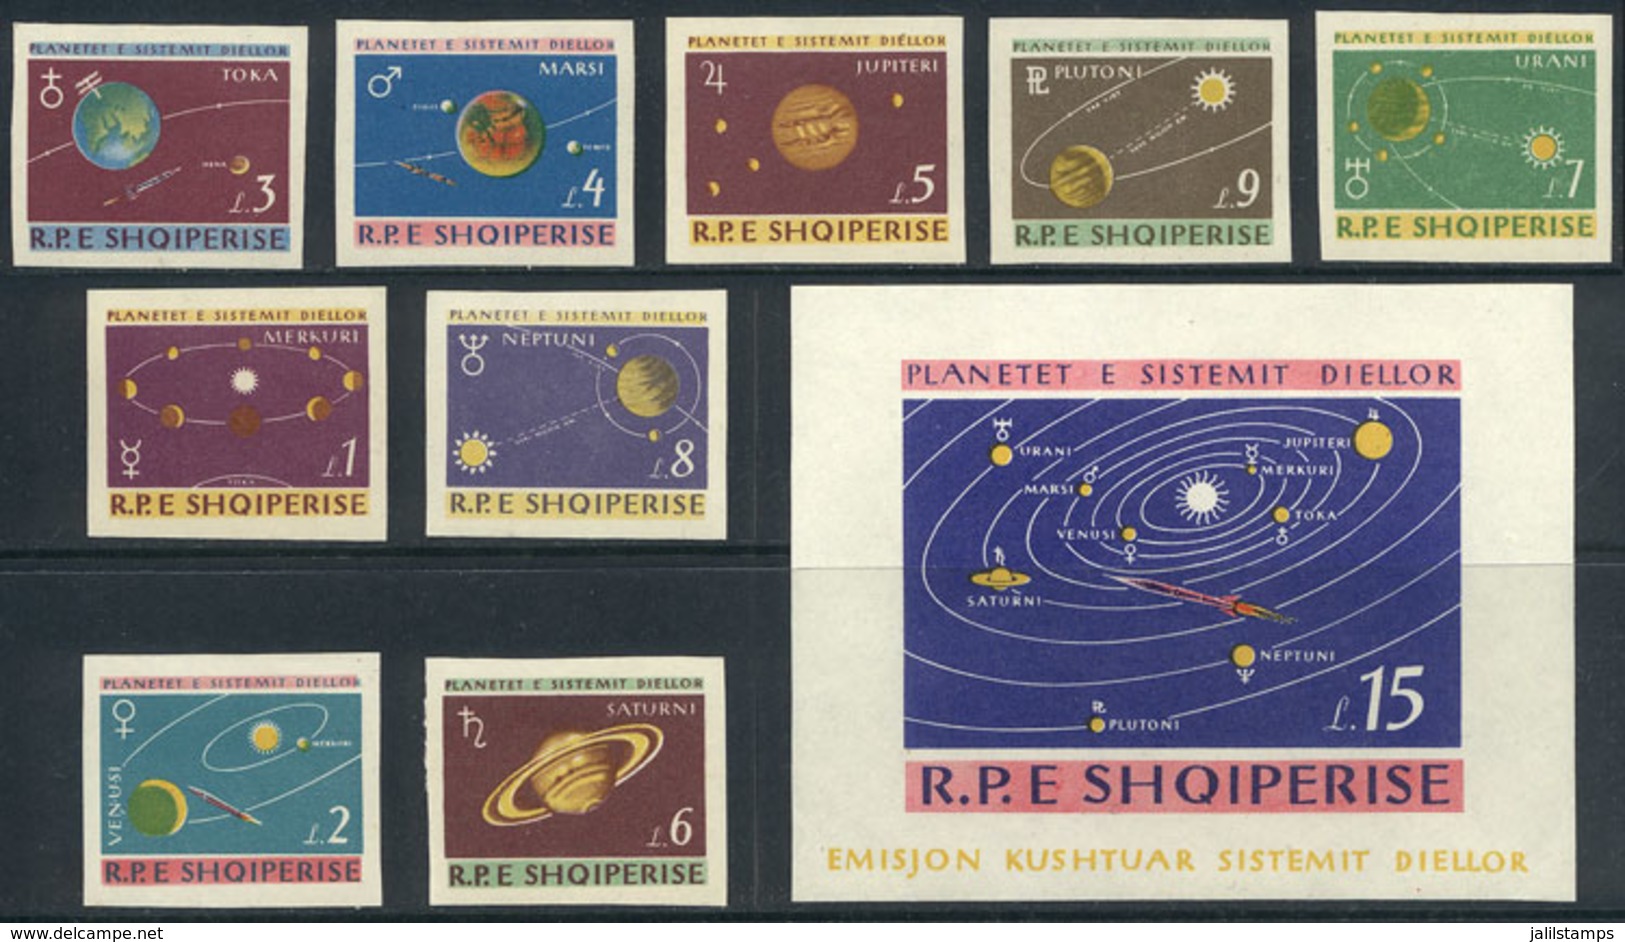 ALBANIA: Yvert 729/37 + Souvenir Sheet 6N IMPERFORATE, 1964 Planets, Complete Set Unmounted, Excellent Quality! - Albanië